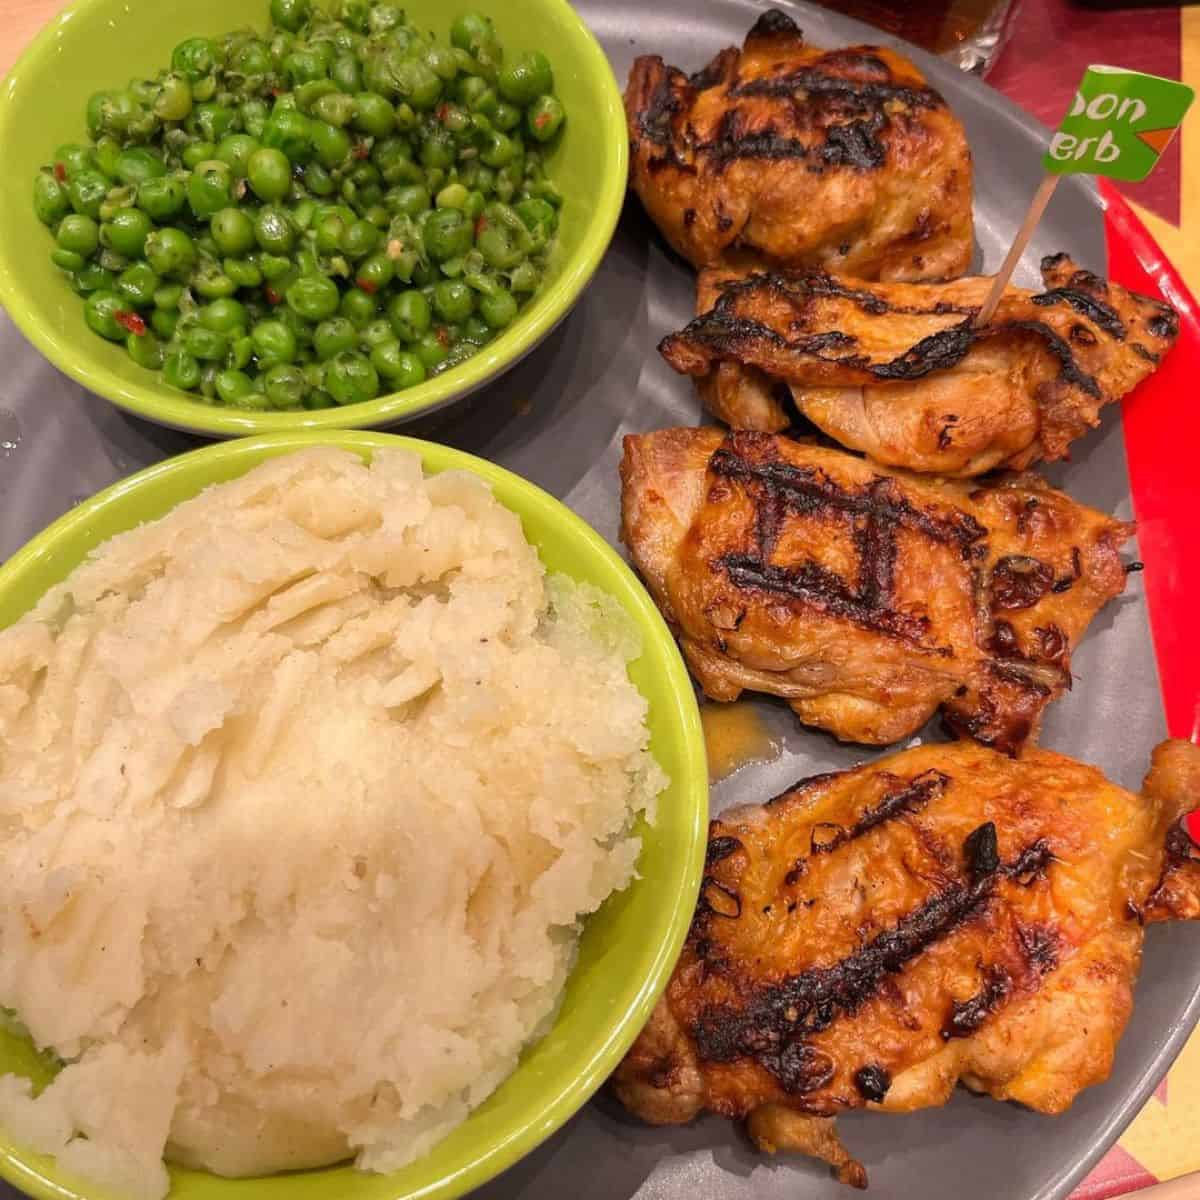 Grilled chicken, mashed potatoes, and green peas